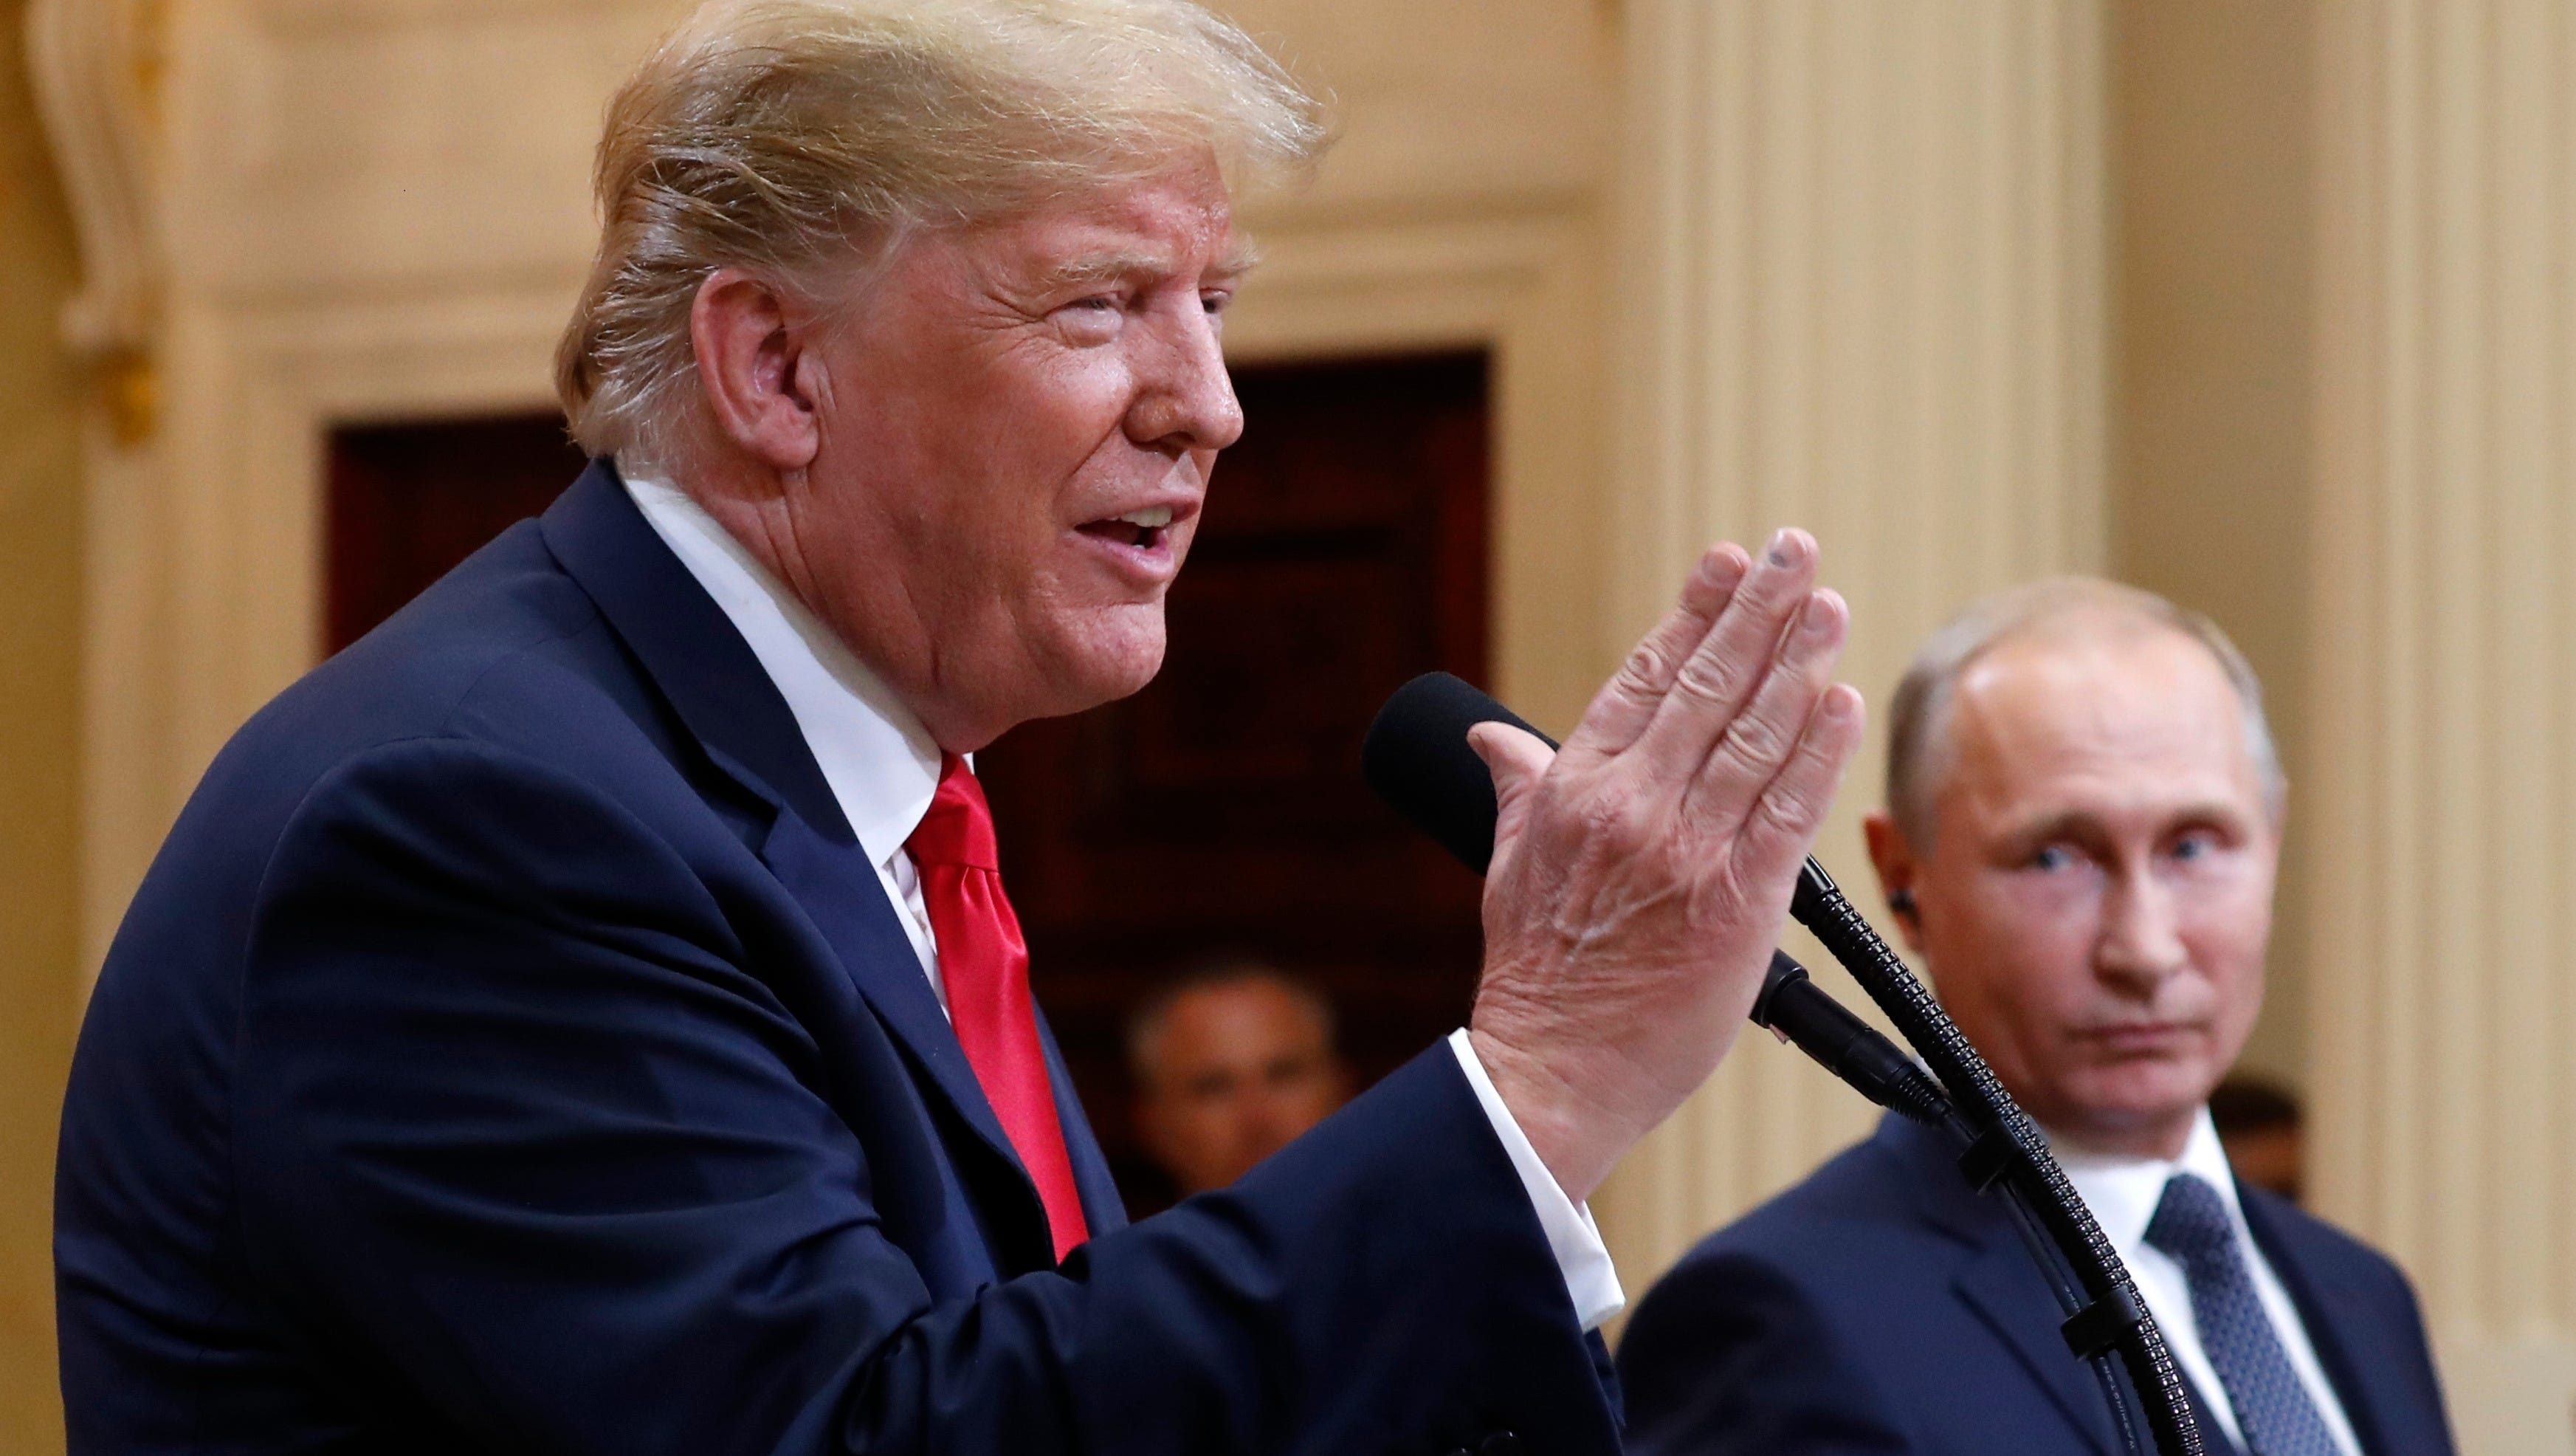 U.S. President Donald Trump speaks with Russian President Vladimir Putin during a press conference after their meeting at the Presidential Palace in Helsinki, Finland, Monday, July 16, 2018.